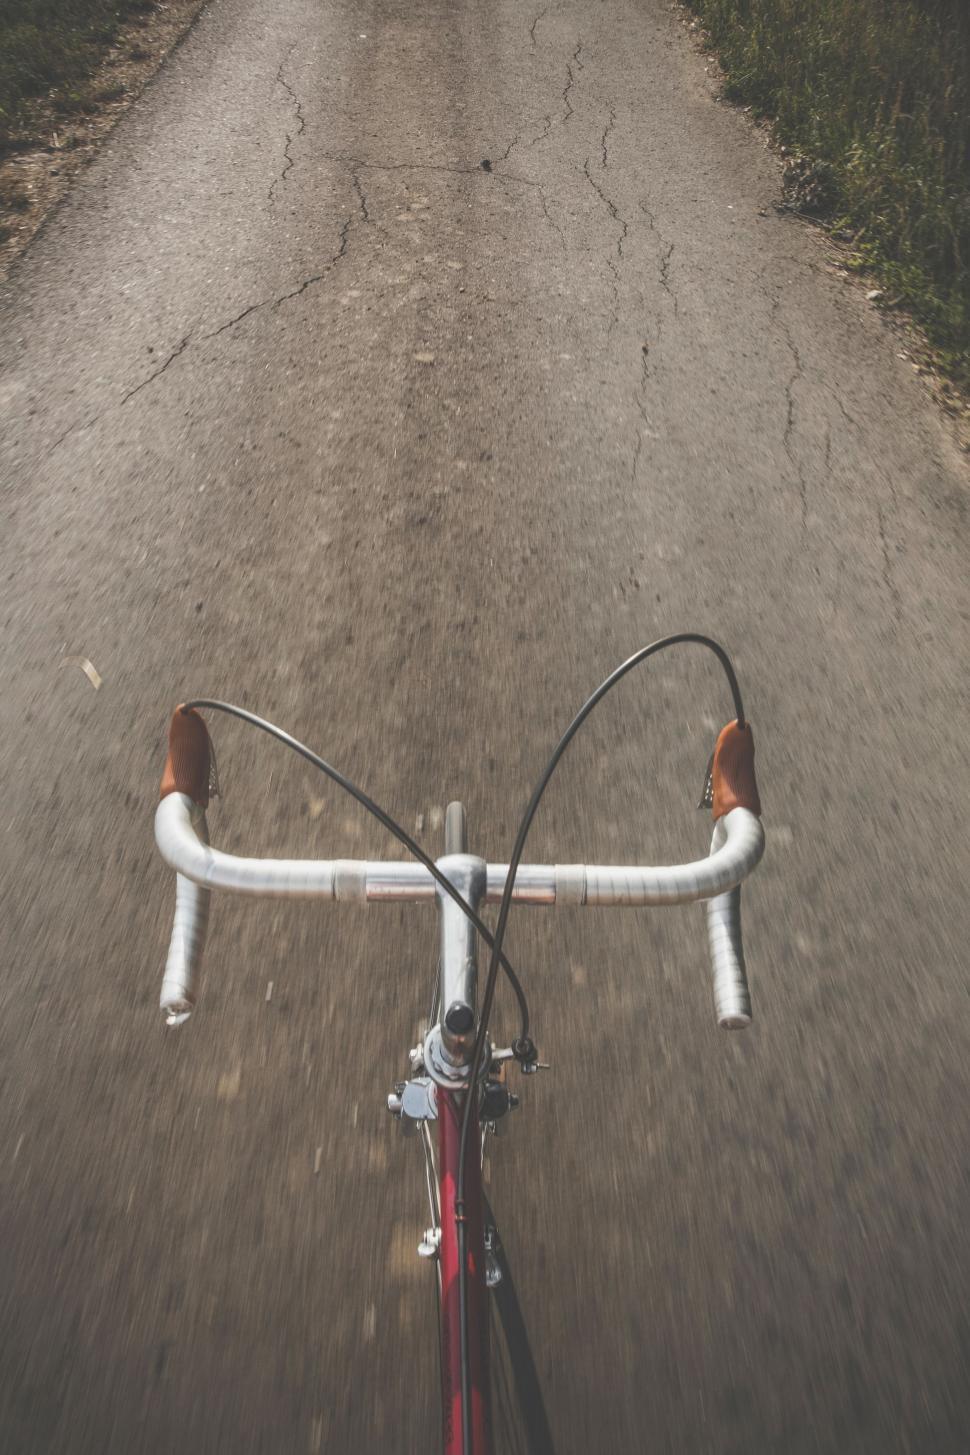 Free Image of Bicycle Parked on Dirt Road 